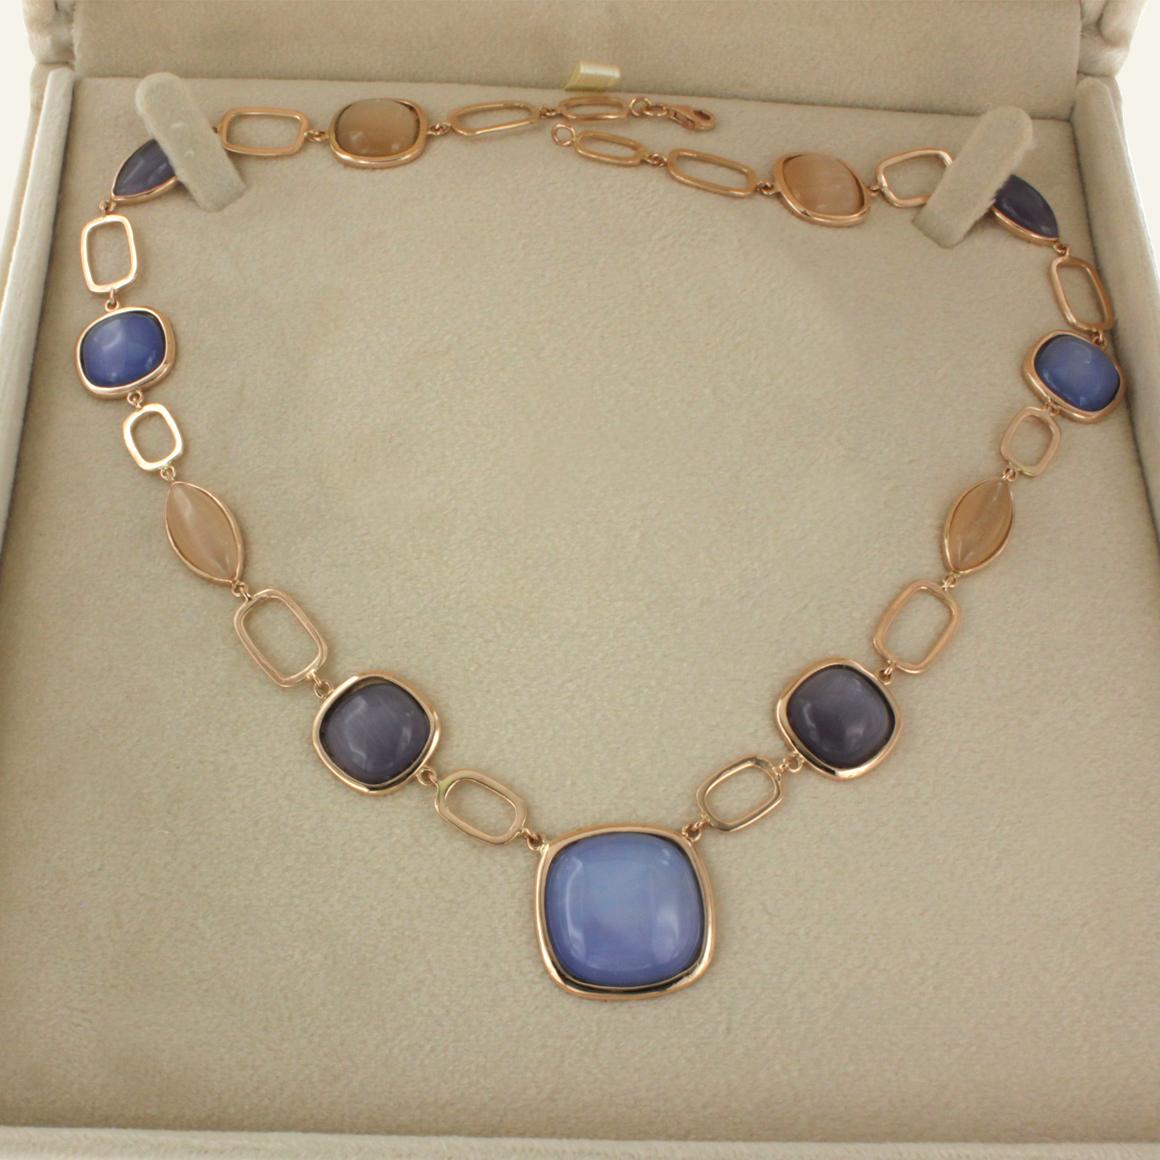 Modern 14k Rose Gold with Colored Stones Necklace